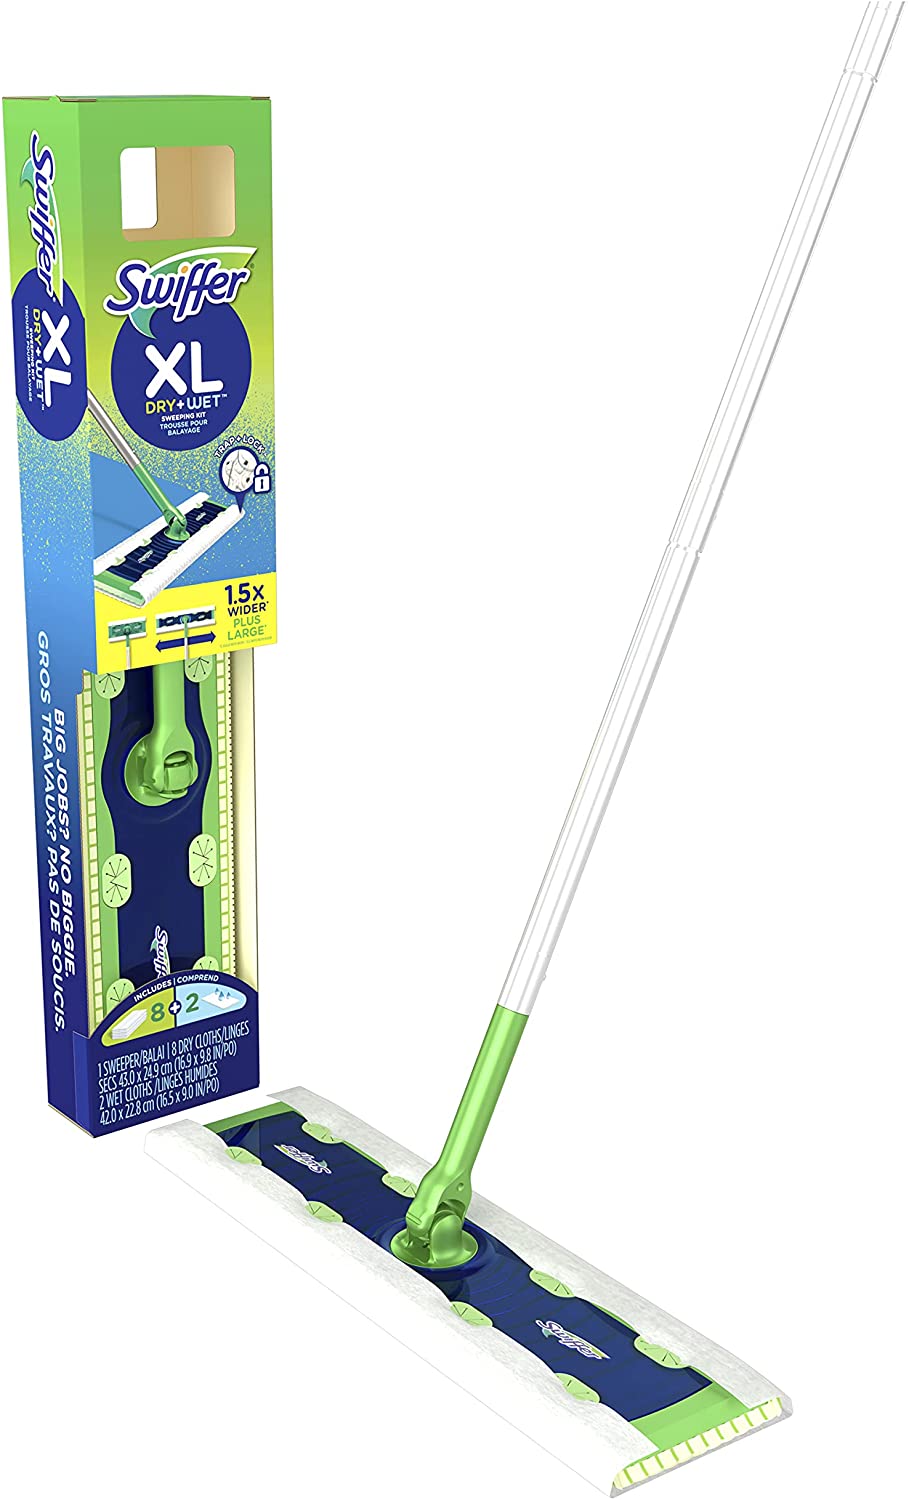 https://bigbigmart.com/wp-content/uploads/2022/05/Swiffer-Sweeper-2-in-1-Dry-Wet-XL-Multi-Surface-Floor-Cleaner-Sweeping-and-Mopping-Starter-Kit-Includes-1-Mop-8-Dry-Cloths-2-Wet-Cloths.jpg